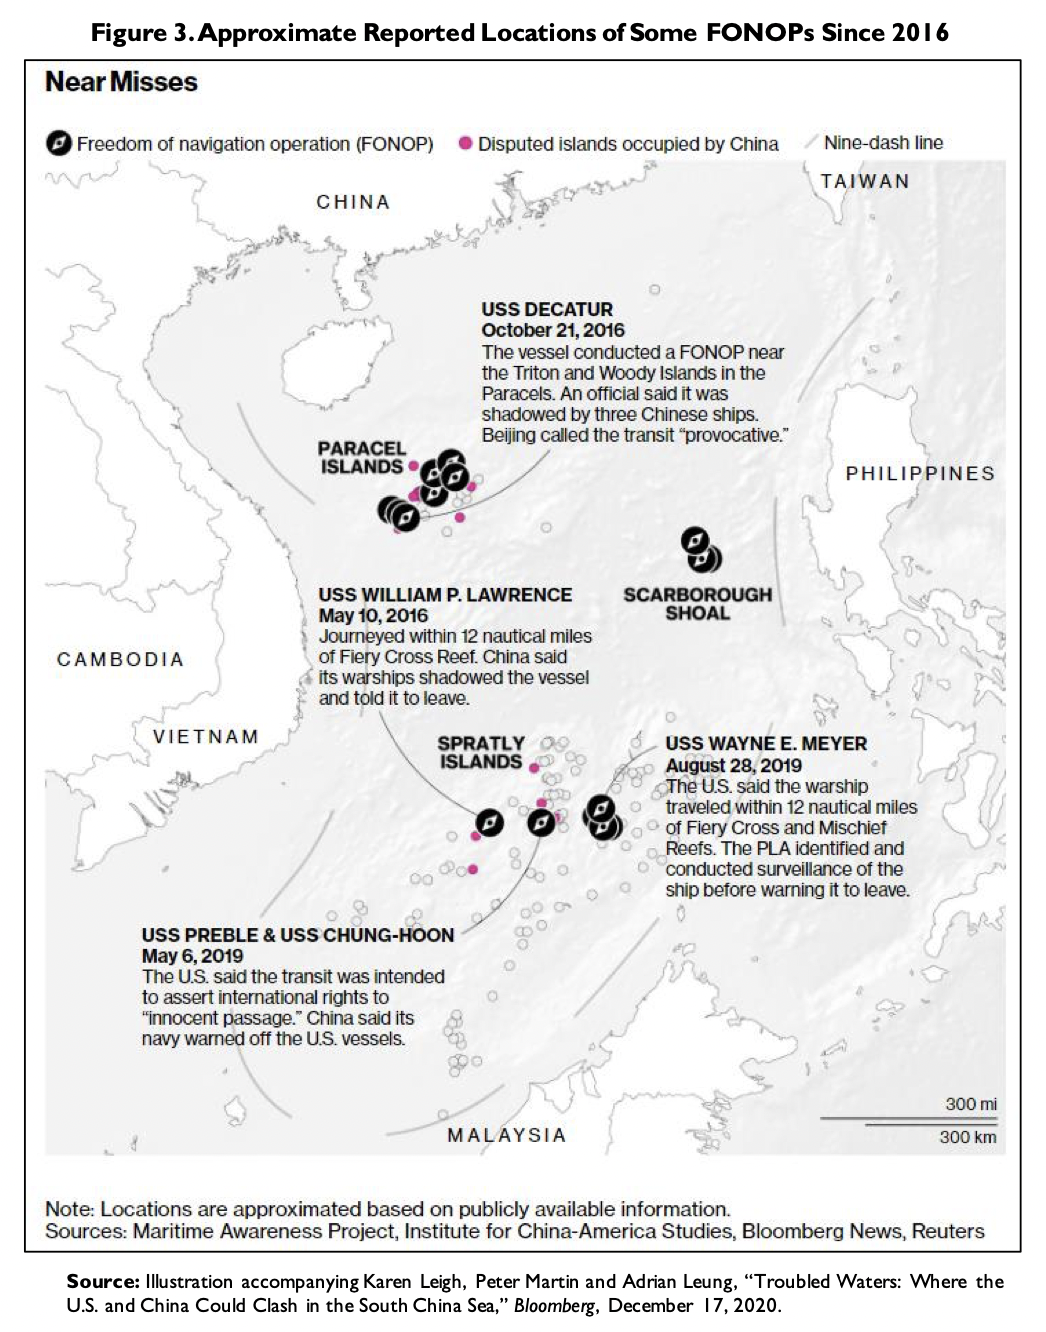 O'Rourke's New CRS Strategic Competition in South & East China Seas”—Latest on CCG + PAFMM & Gray Zone Ops | Andrew S. Erickson